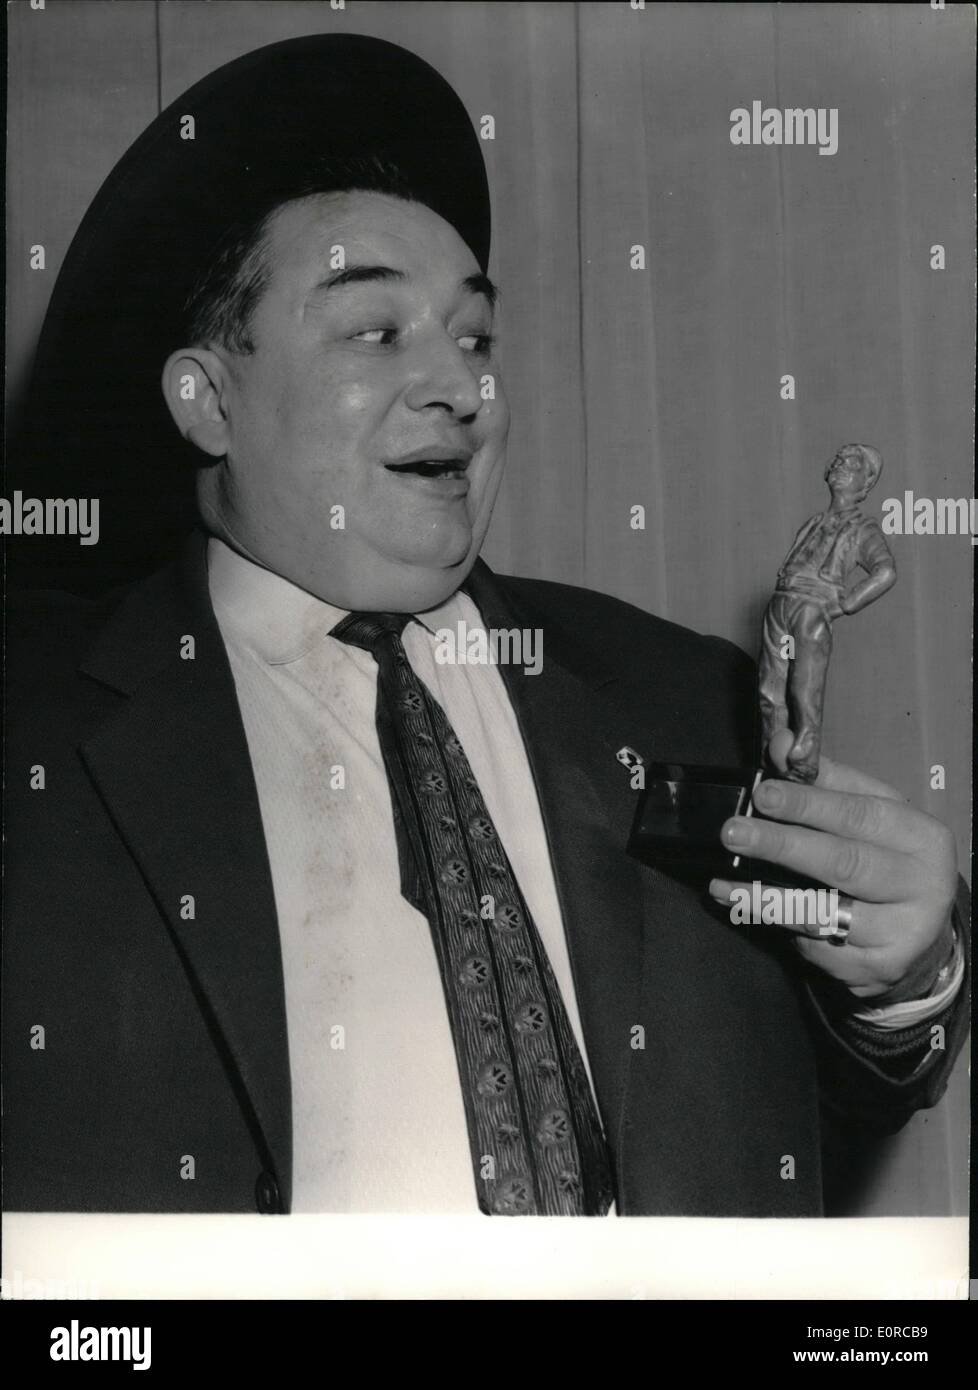 Jan. 01, 1959 - Paris Pedlar gets award for humor: A distribution of awards to the best Pris street Pedlars was held at the coupole, the famous Montparnasse cafe and brasserie, this morning. Photo shows Max Dupuy (Alias ''max the necktie'') the well-known a reet pedlar who sells neckties on the boulevards showing his award, an ''Oscar'' for the most humorous demonstration' Stock Photo